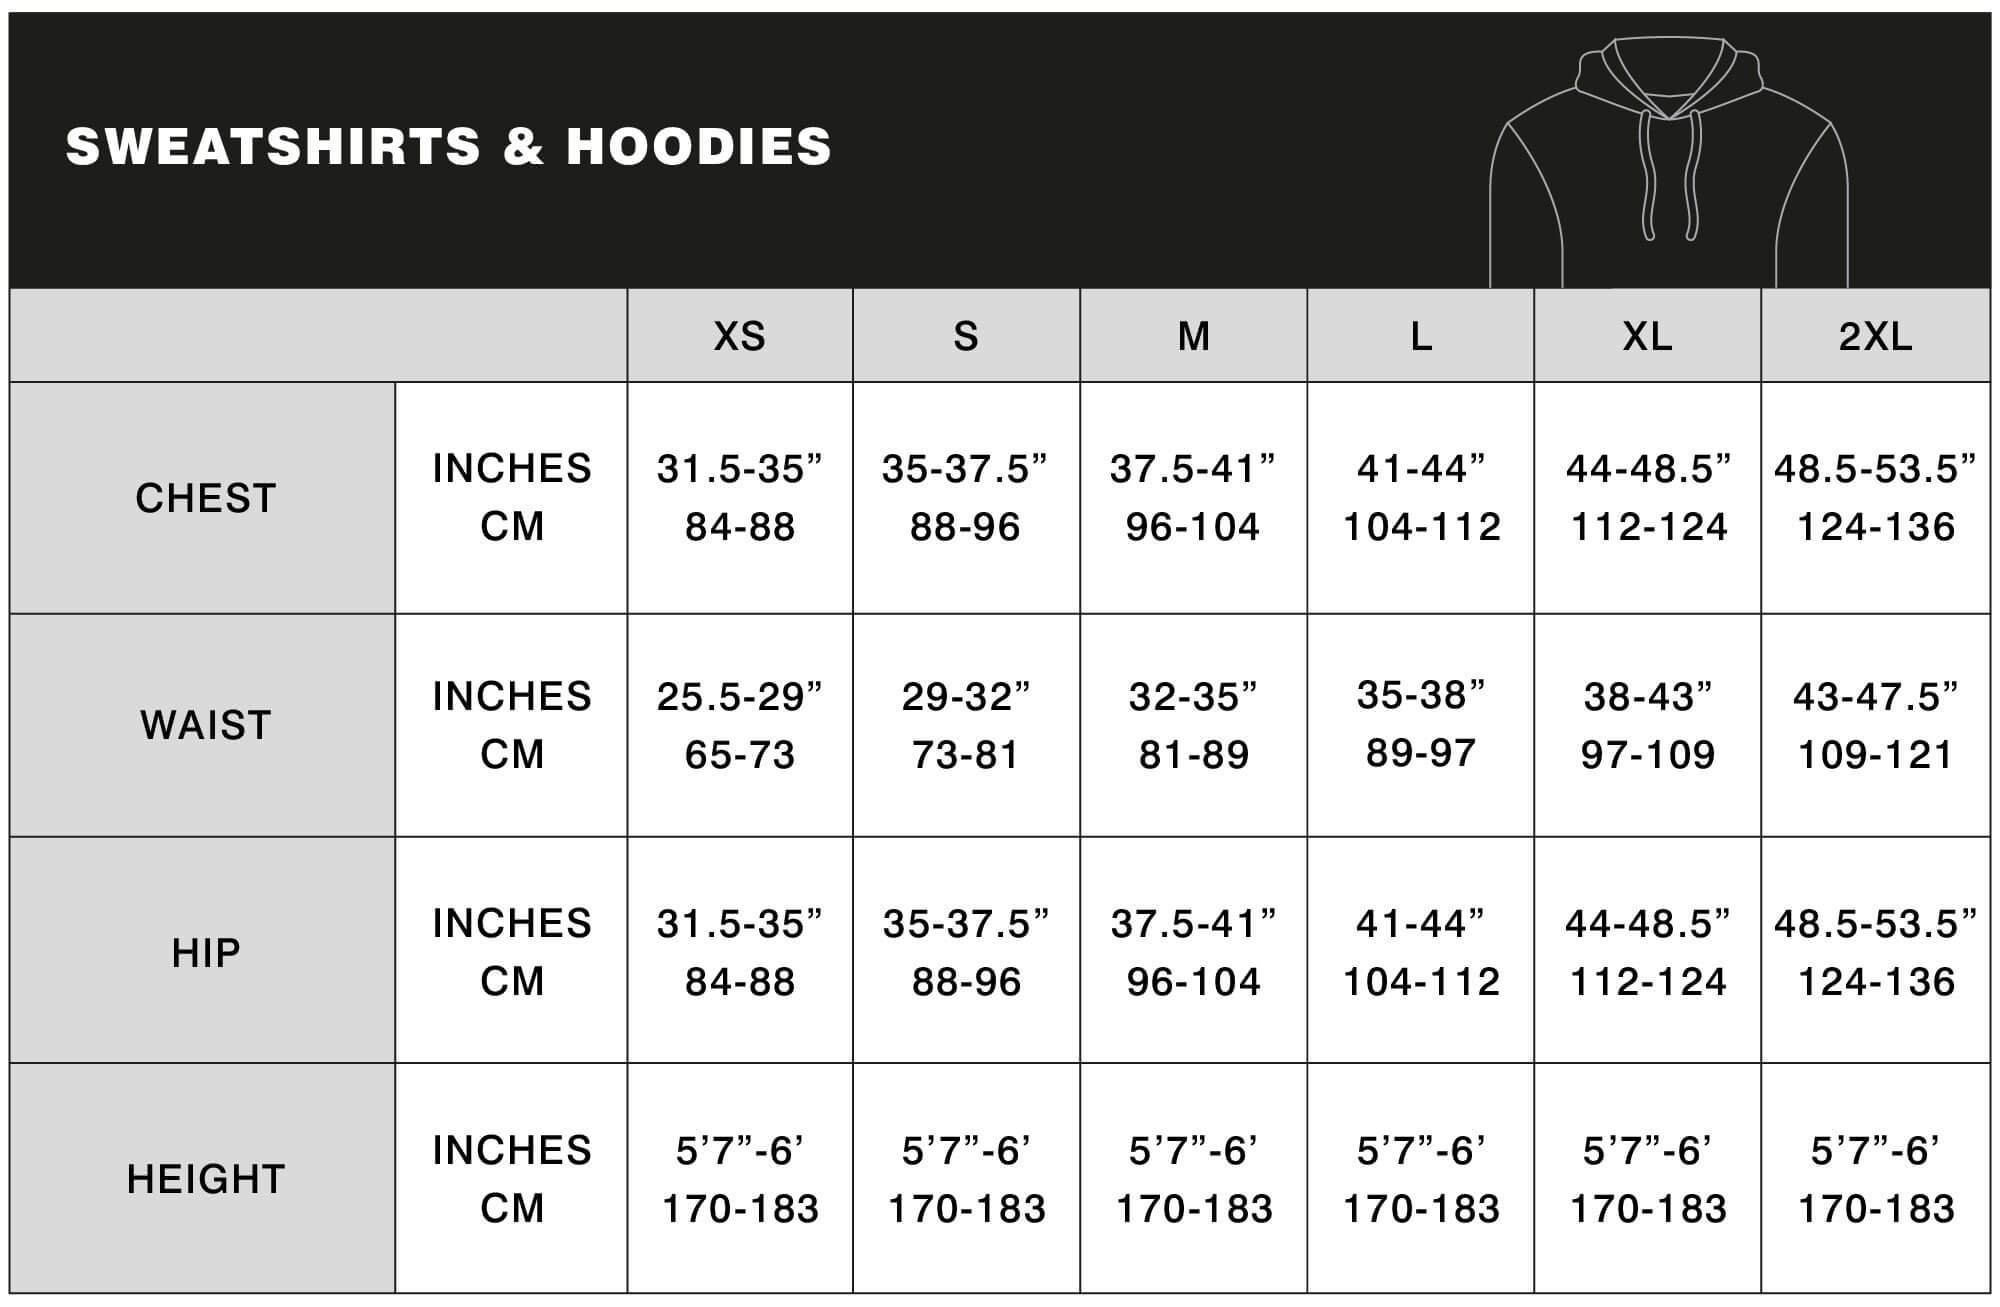 men's sweatshirts and hoodies size guide table for desktop